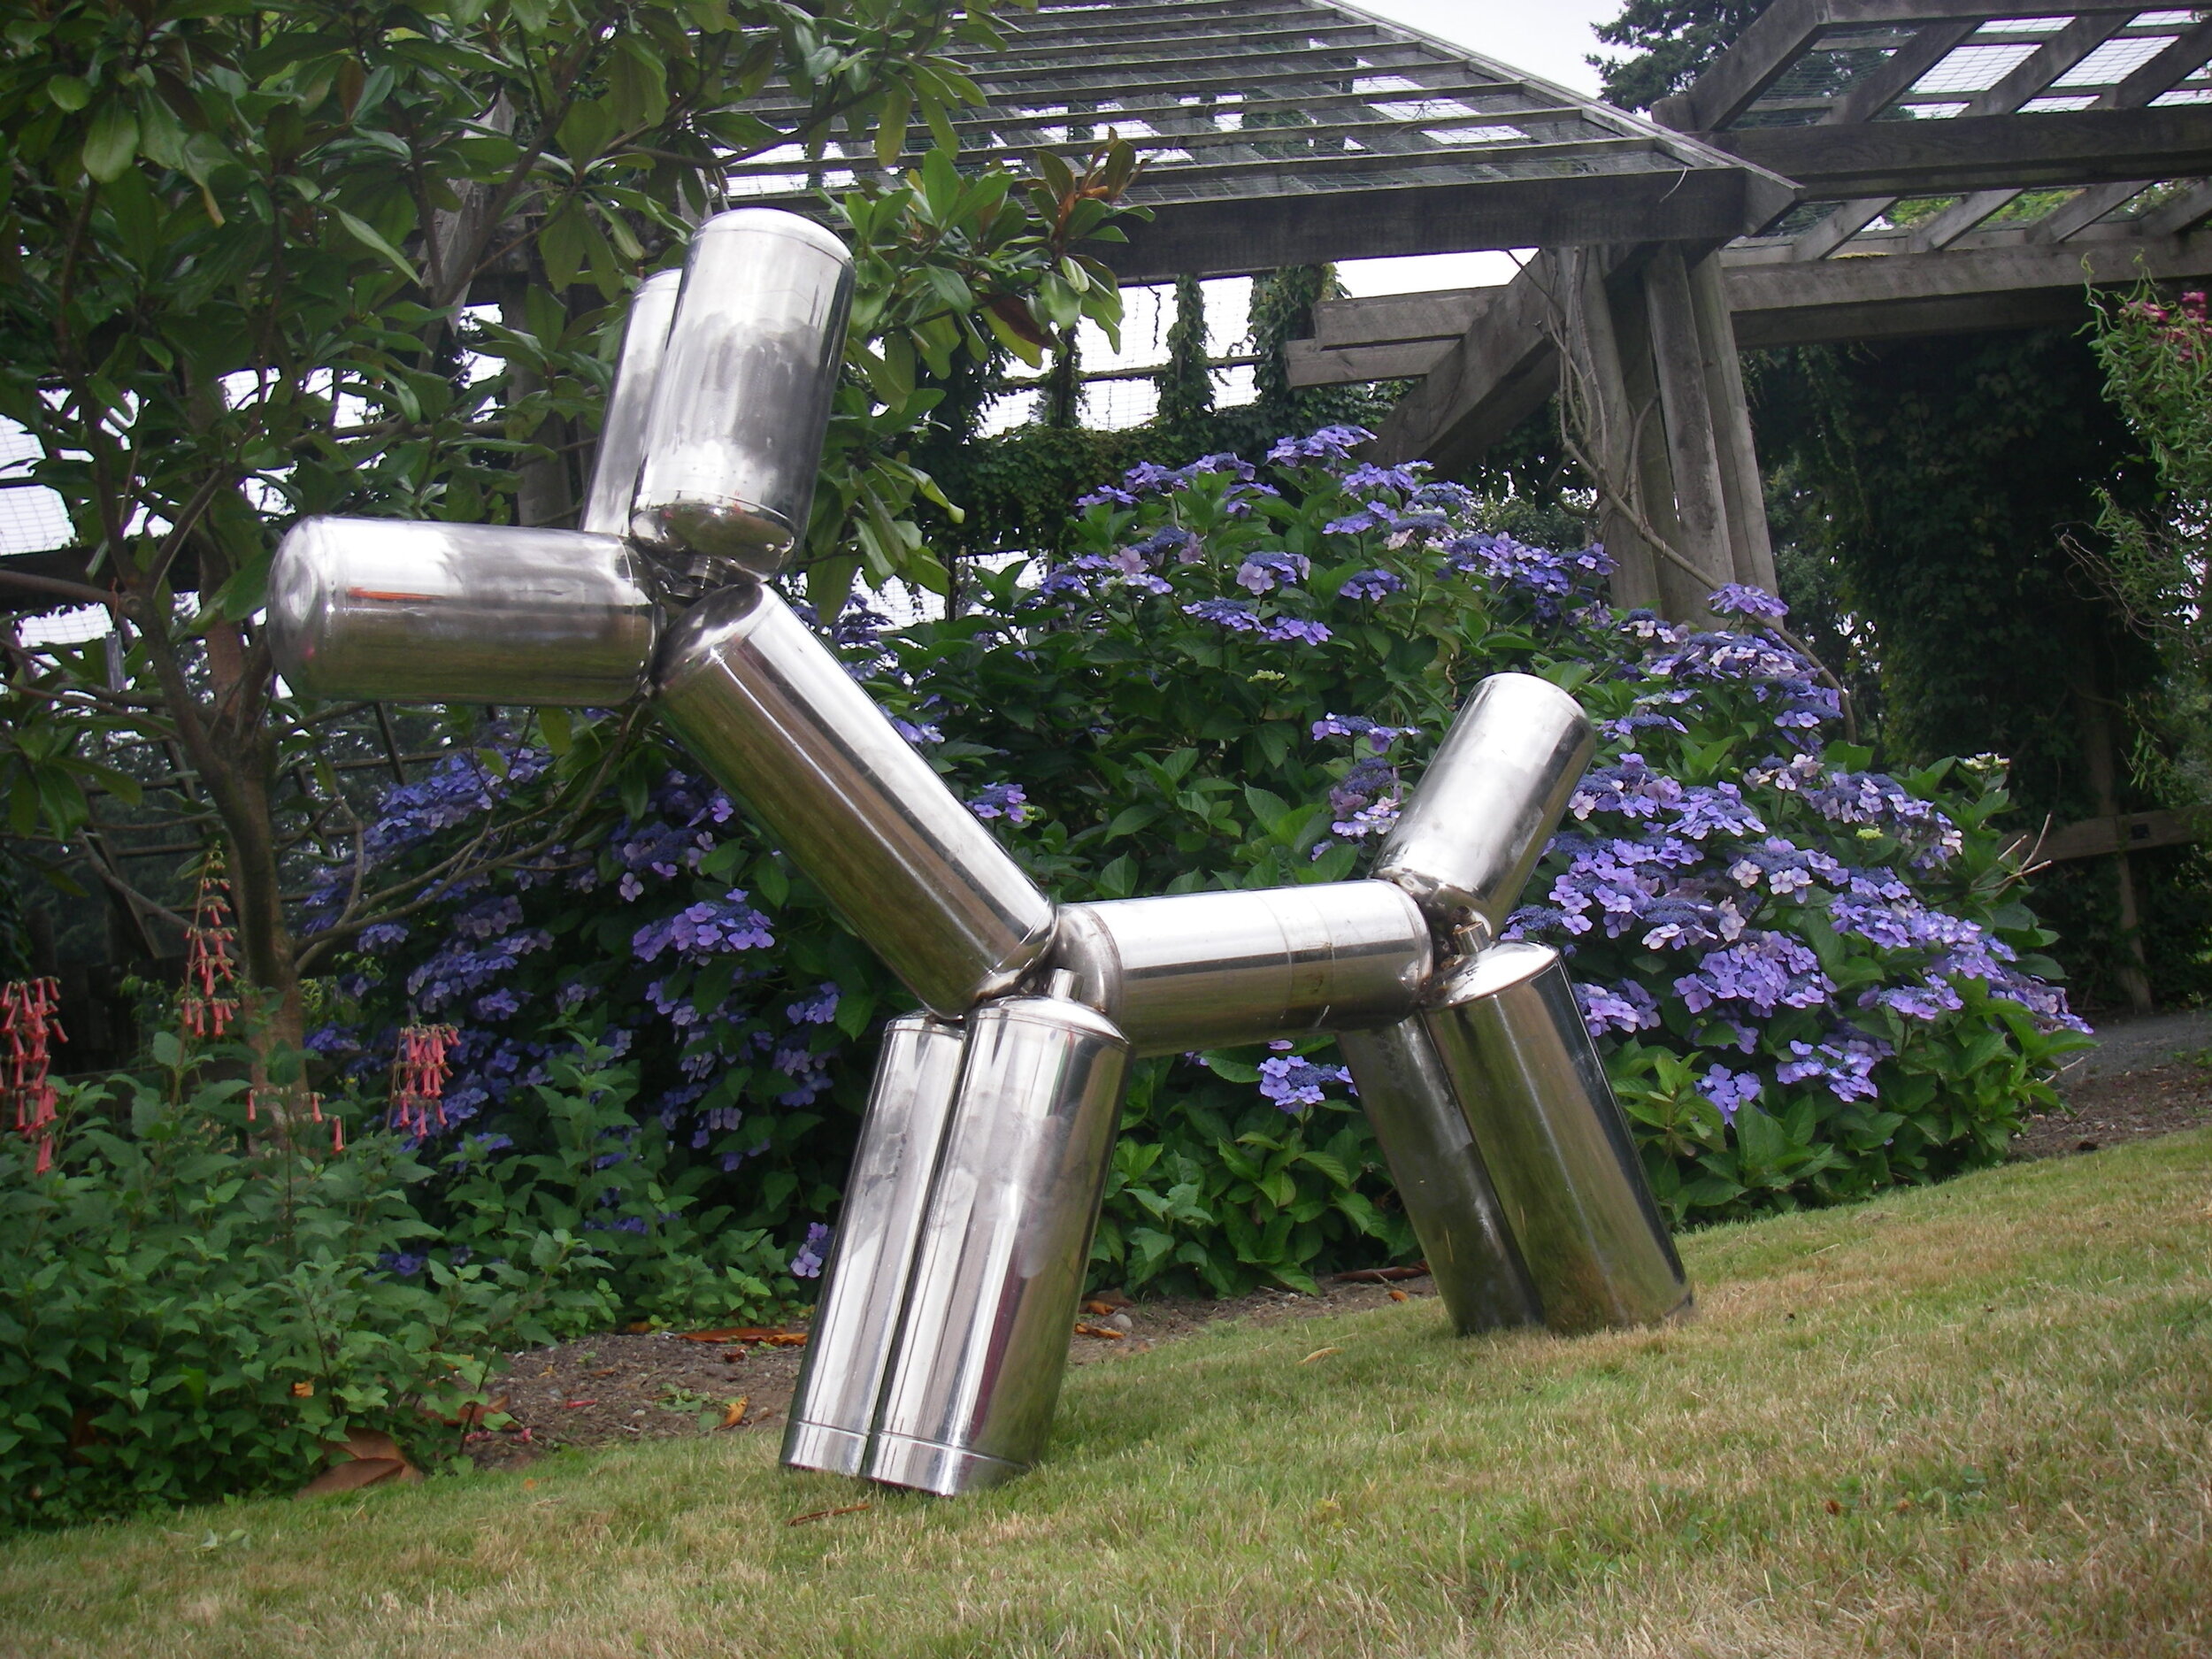 "Stainless Steel Dog" (2014)